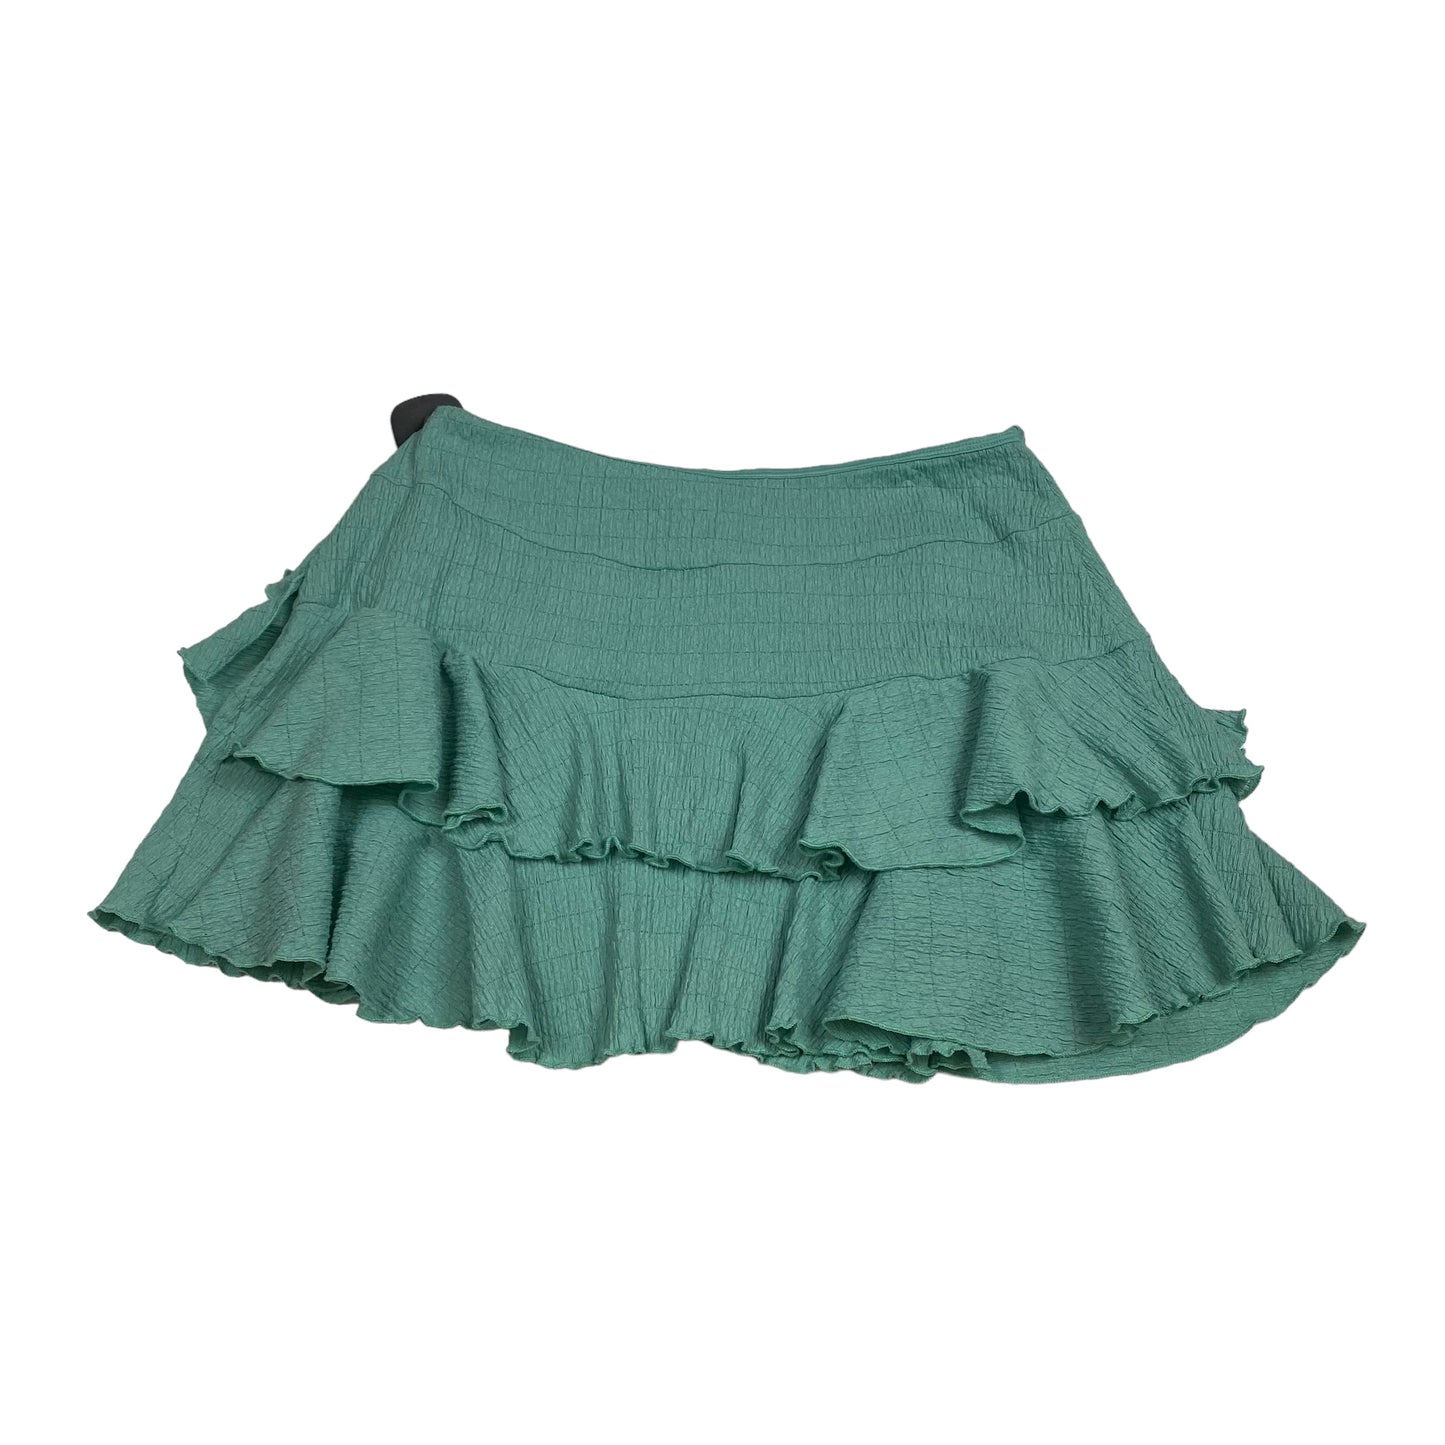 Skirt Mini & Short By Wild Fable  Size: M